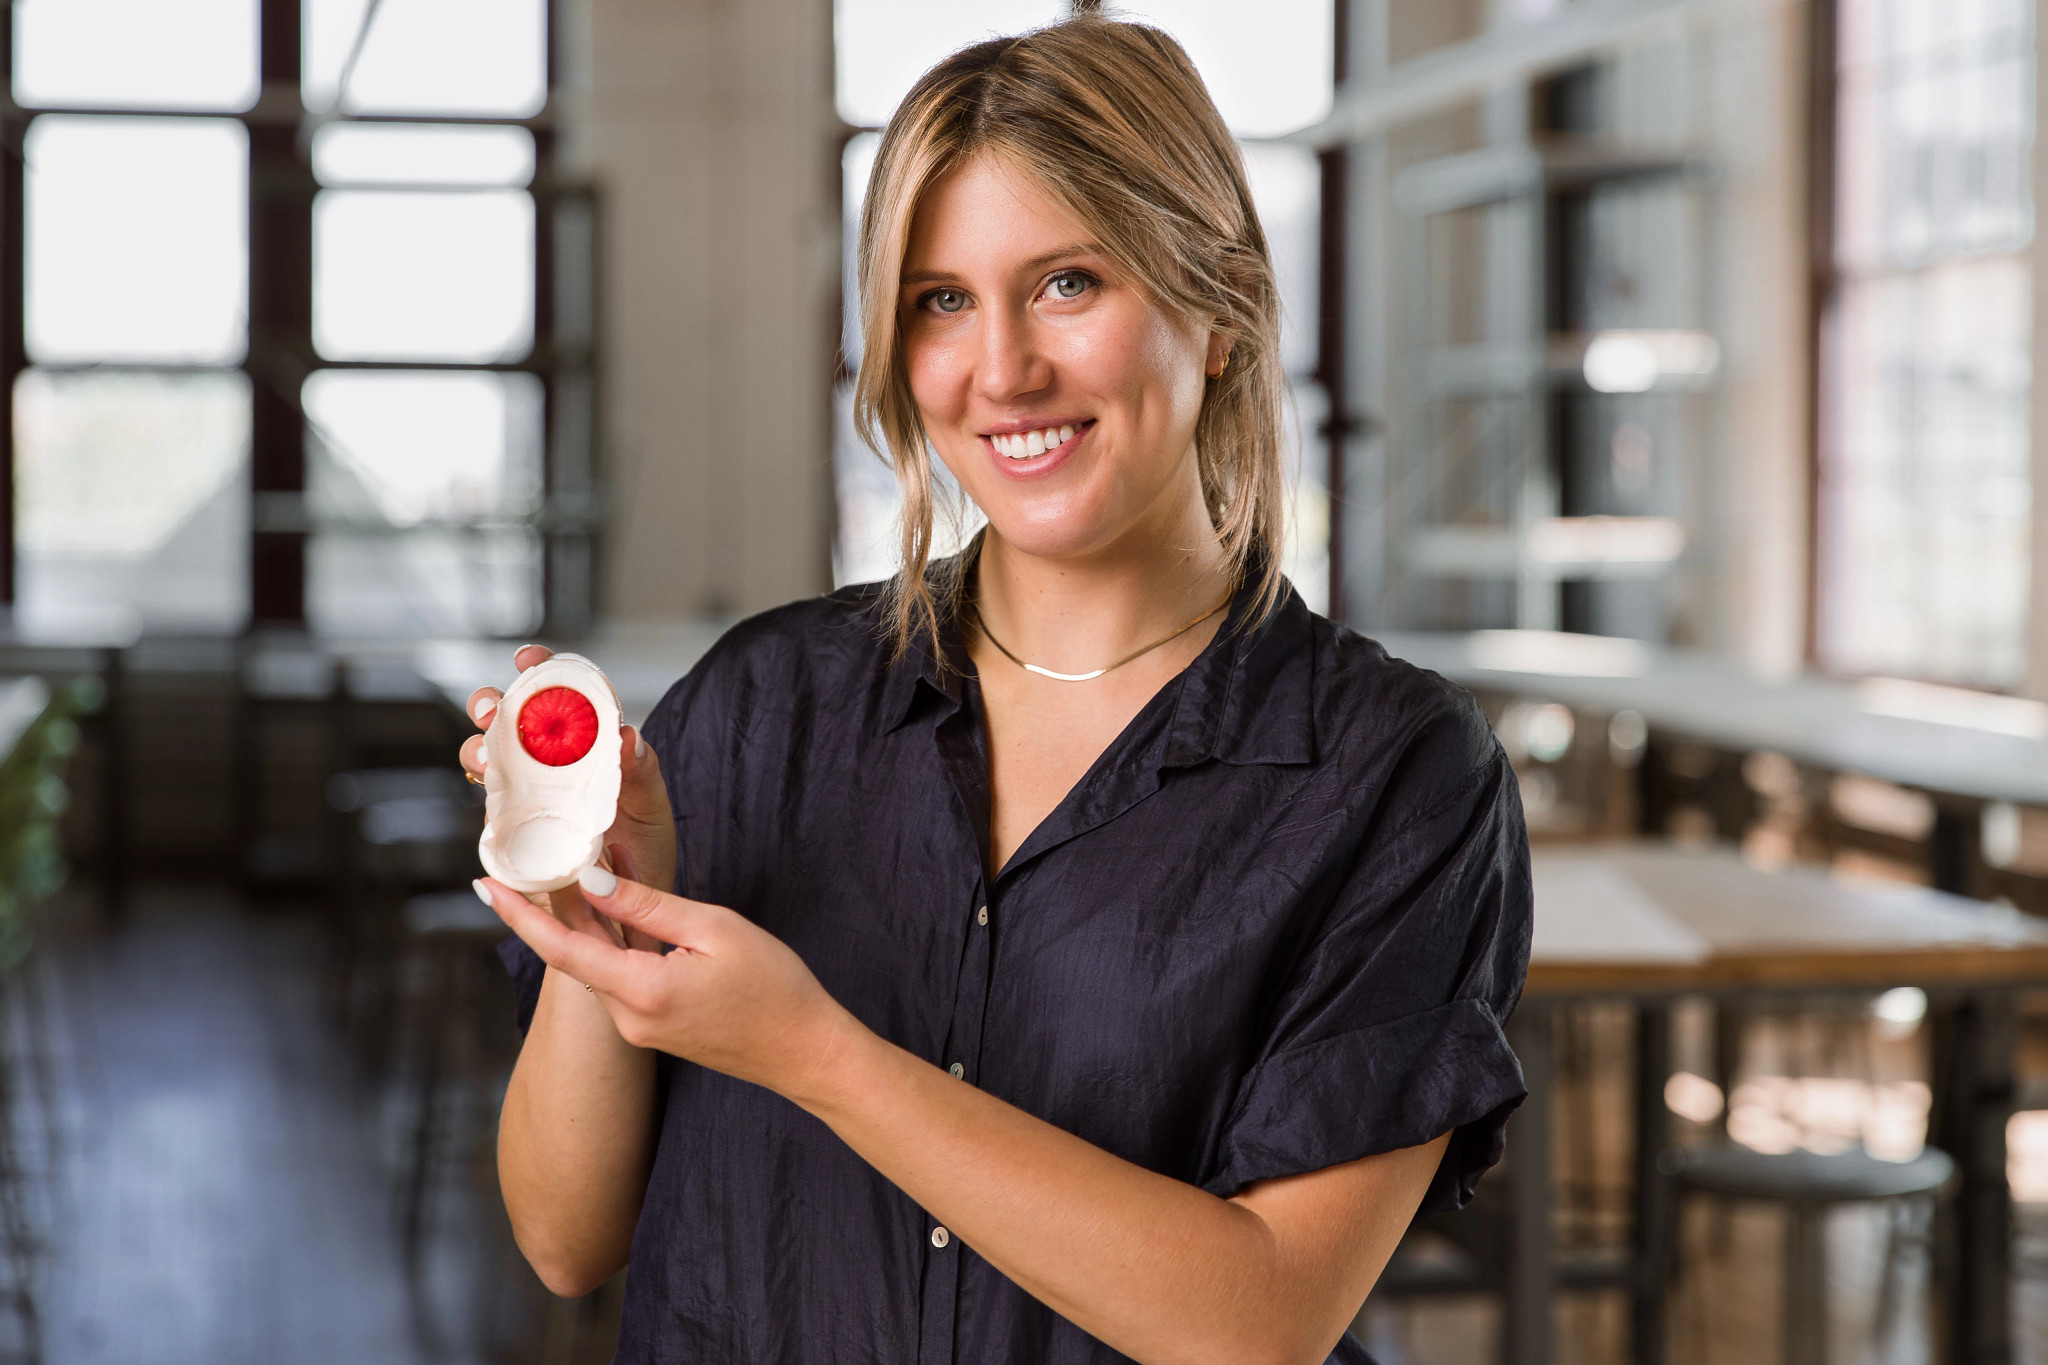 A woman smiles and poses for the camera. She is holding a small white and red device in her hands displaying it for the viewer.